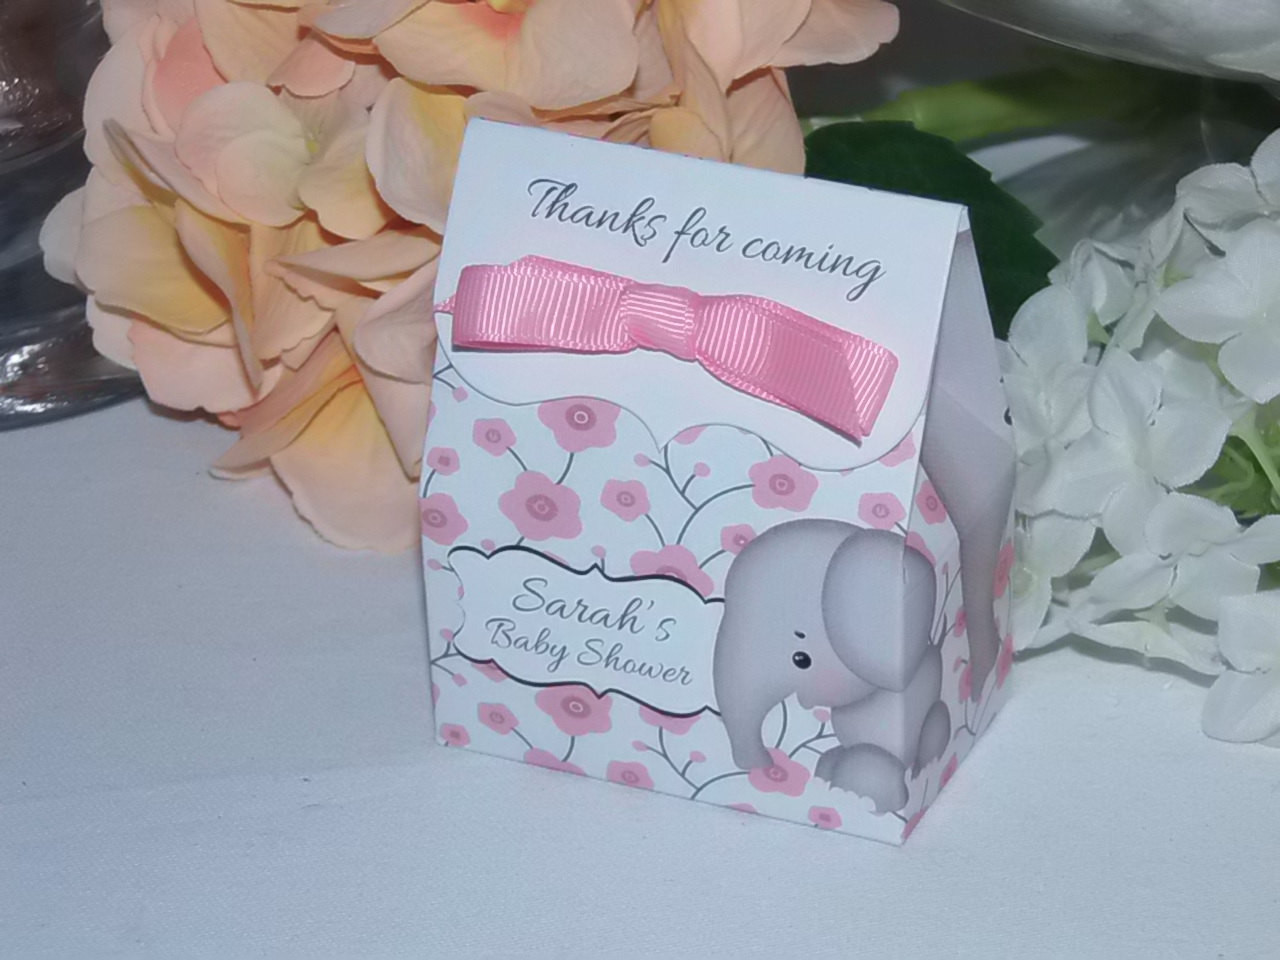 Personalized Baby Shower Party Favor
 Elephant Favor Bags Personalized Baby Shower Favors Pink